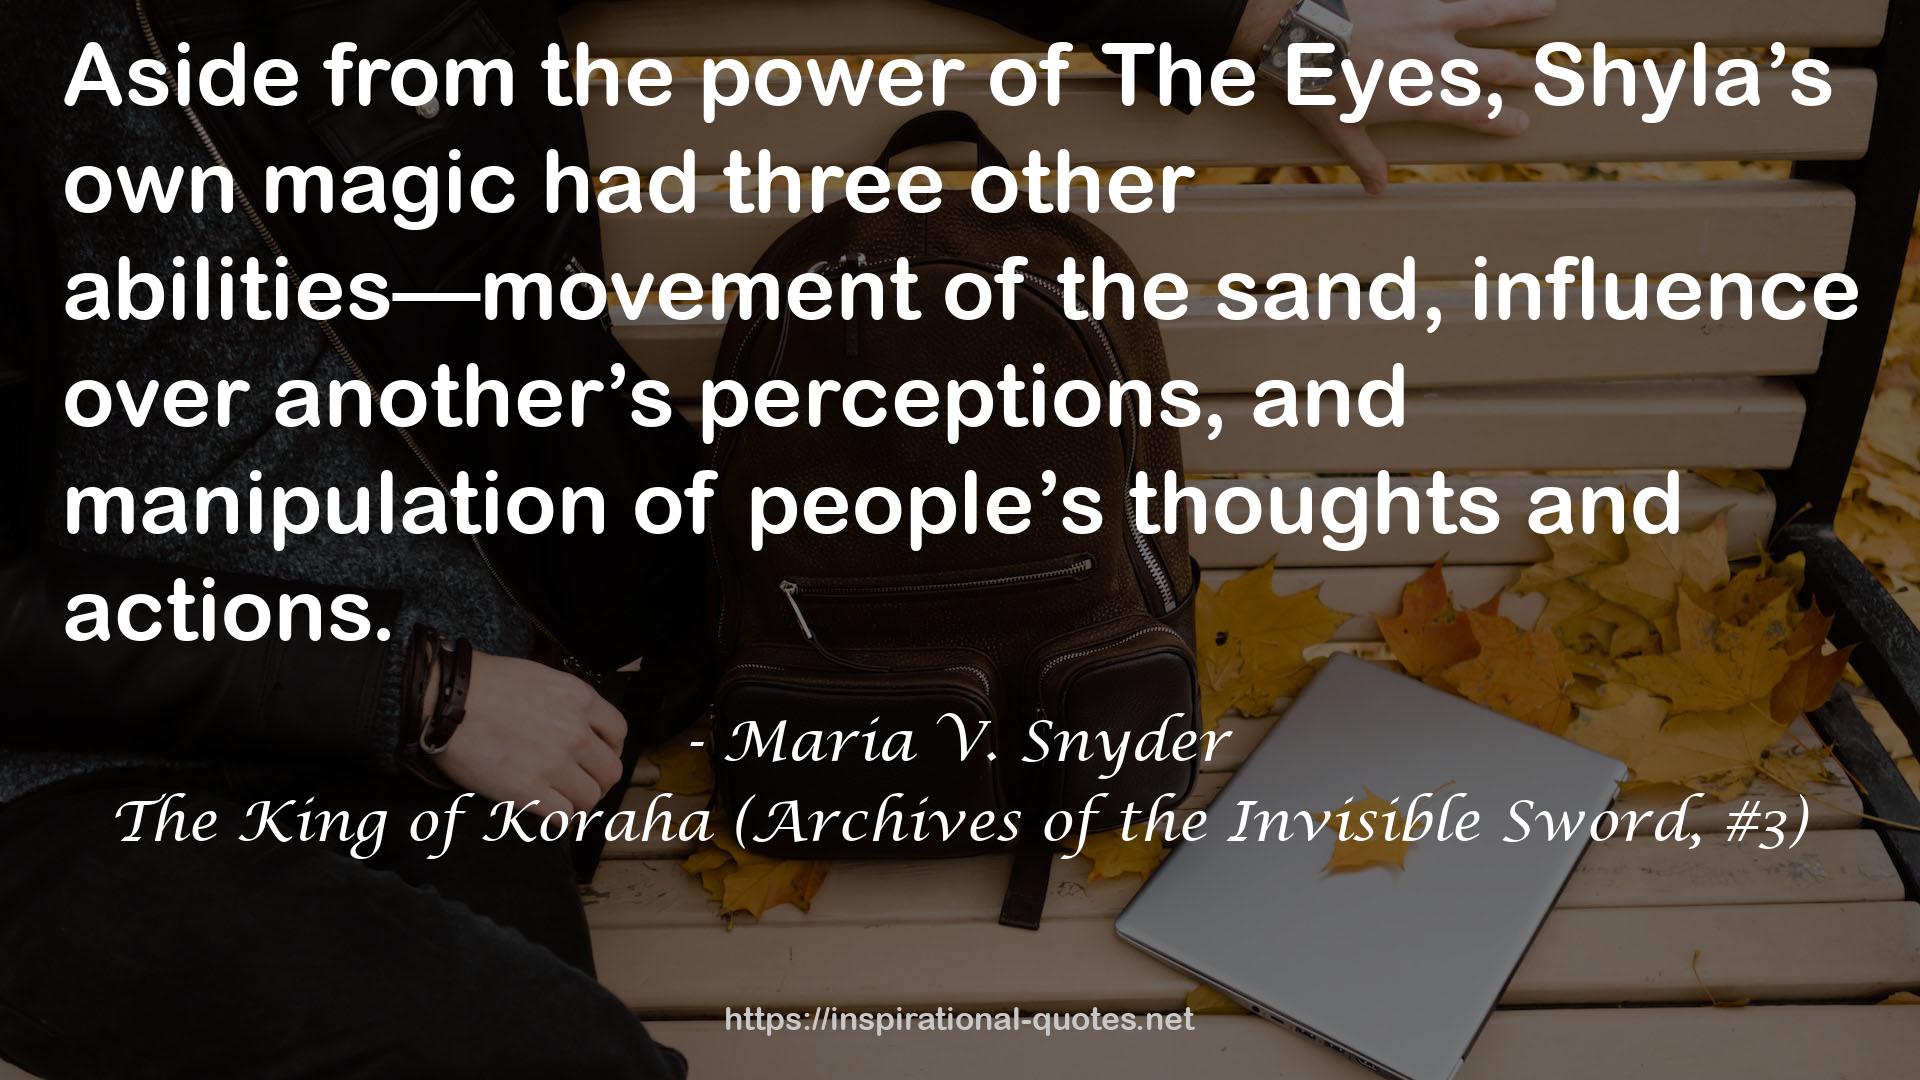 The King of Koraha (Archives of the Invisible Sword, #3) QUOTES